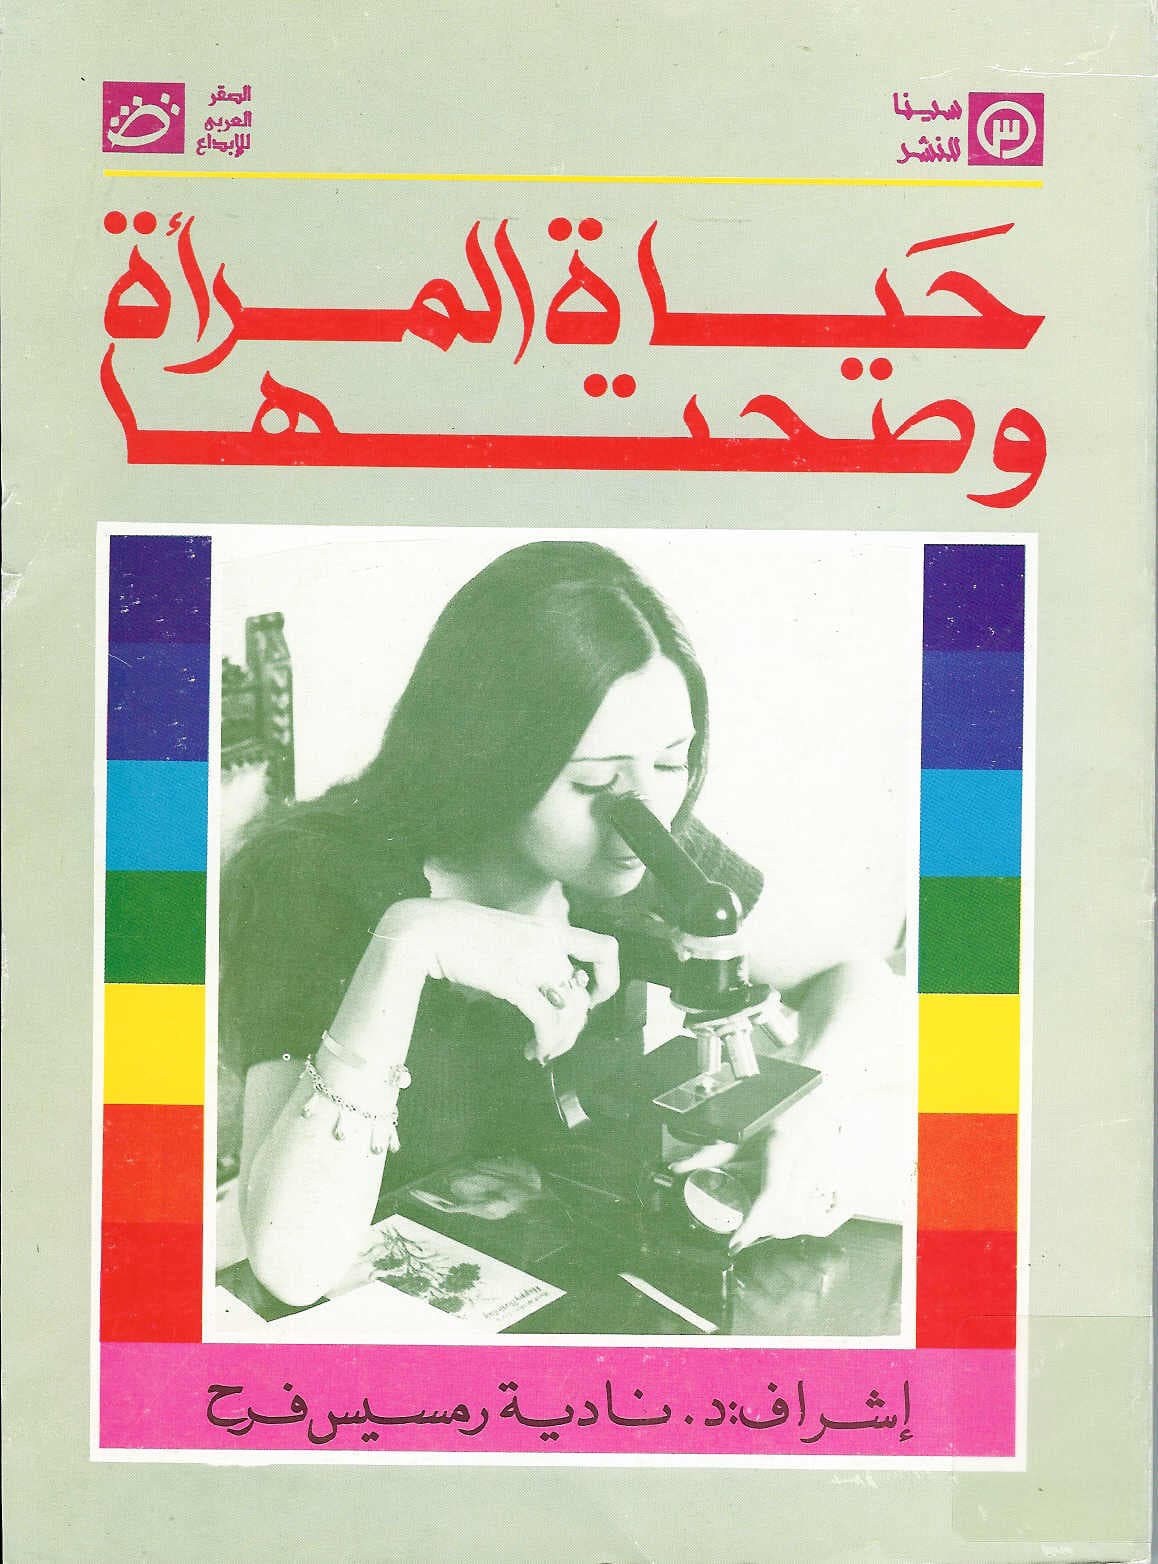 The cover of the Arabic edition of "Our Bodies, Ourselves," published in 1991. (Courtesy/Our Bodies Ourselves)